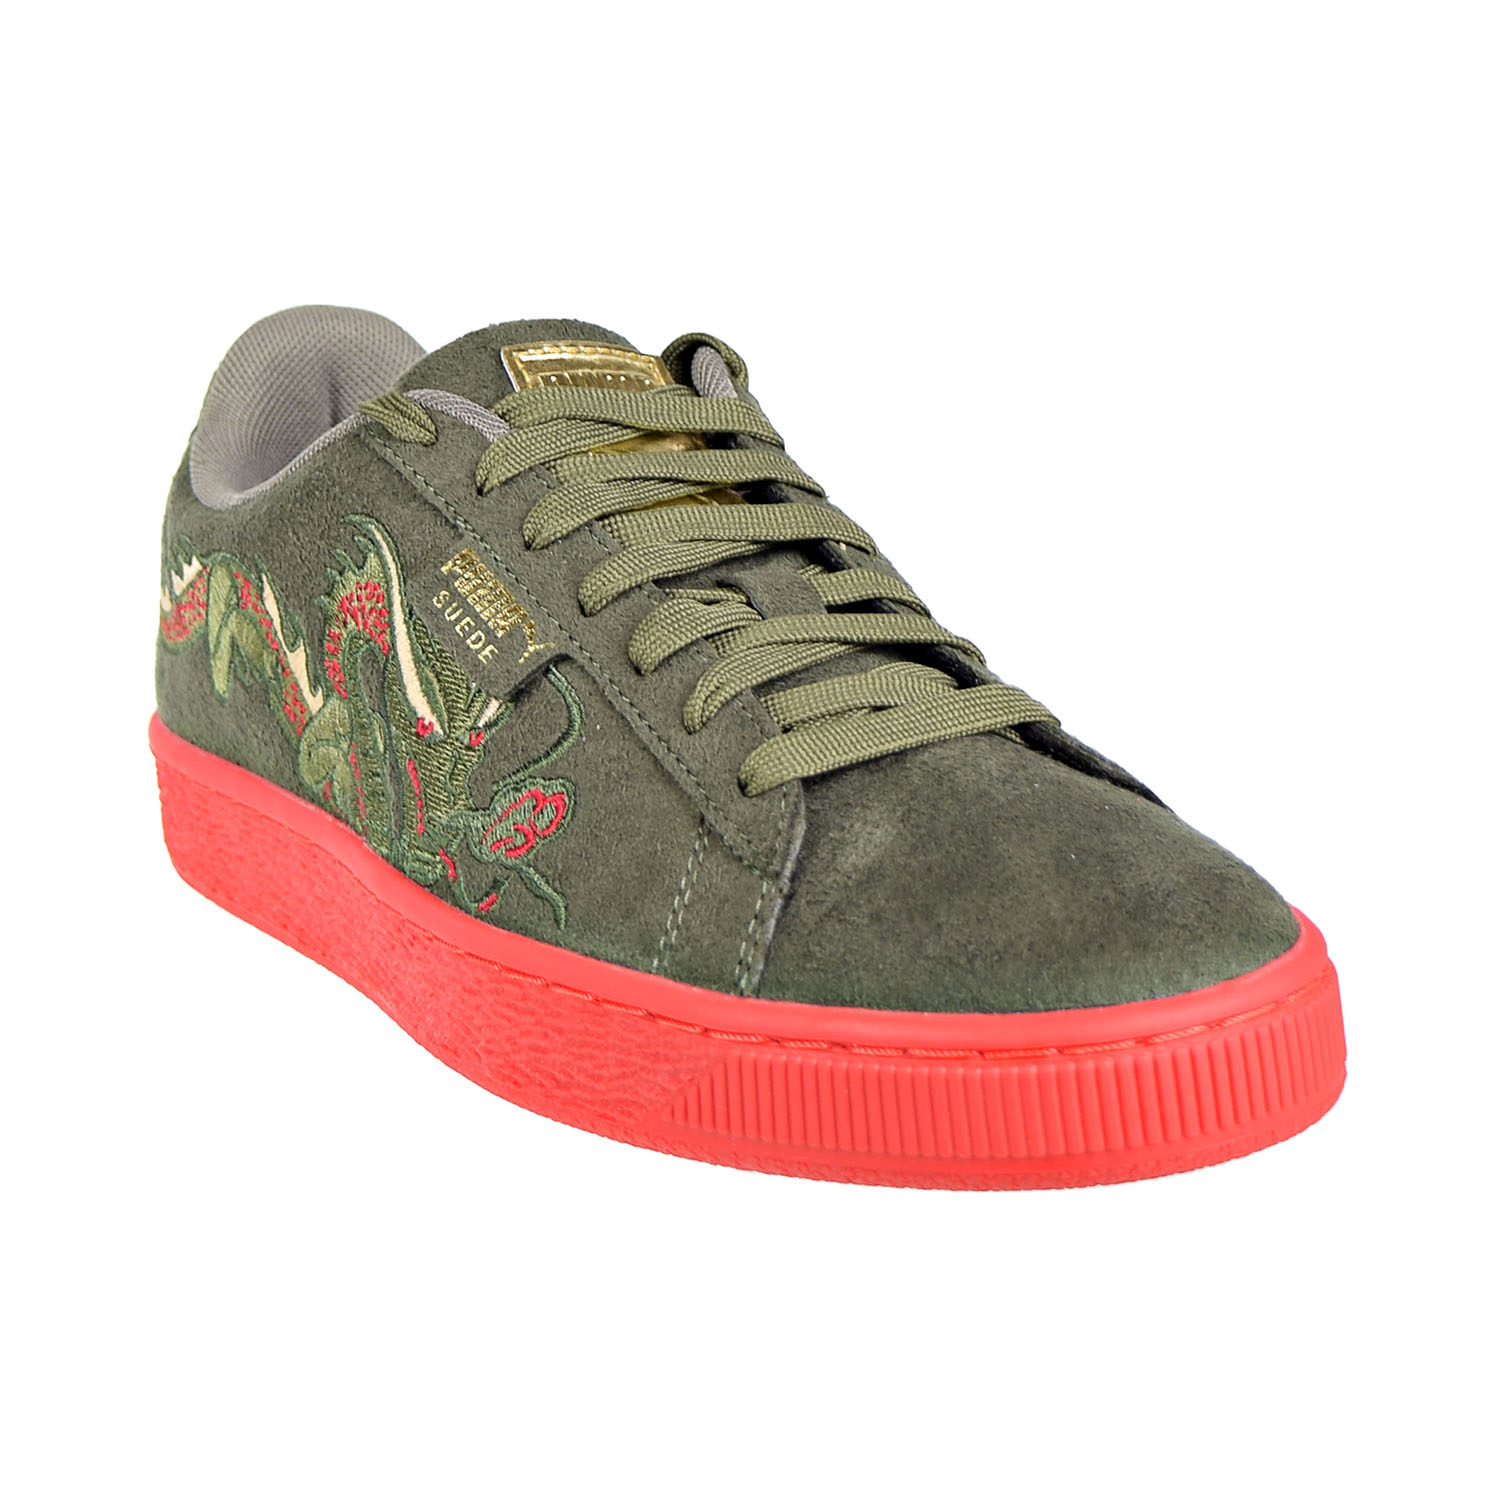 Puma Court Classic Dragon Patch Men's Shoes Burnt Olive/High Risk Red 368359-01 - image 2 of 6